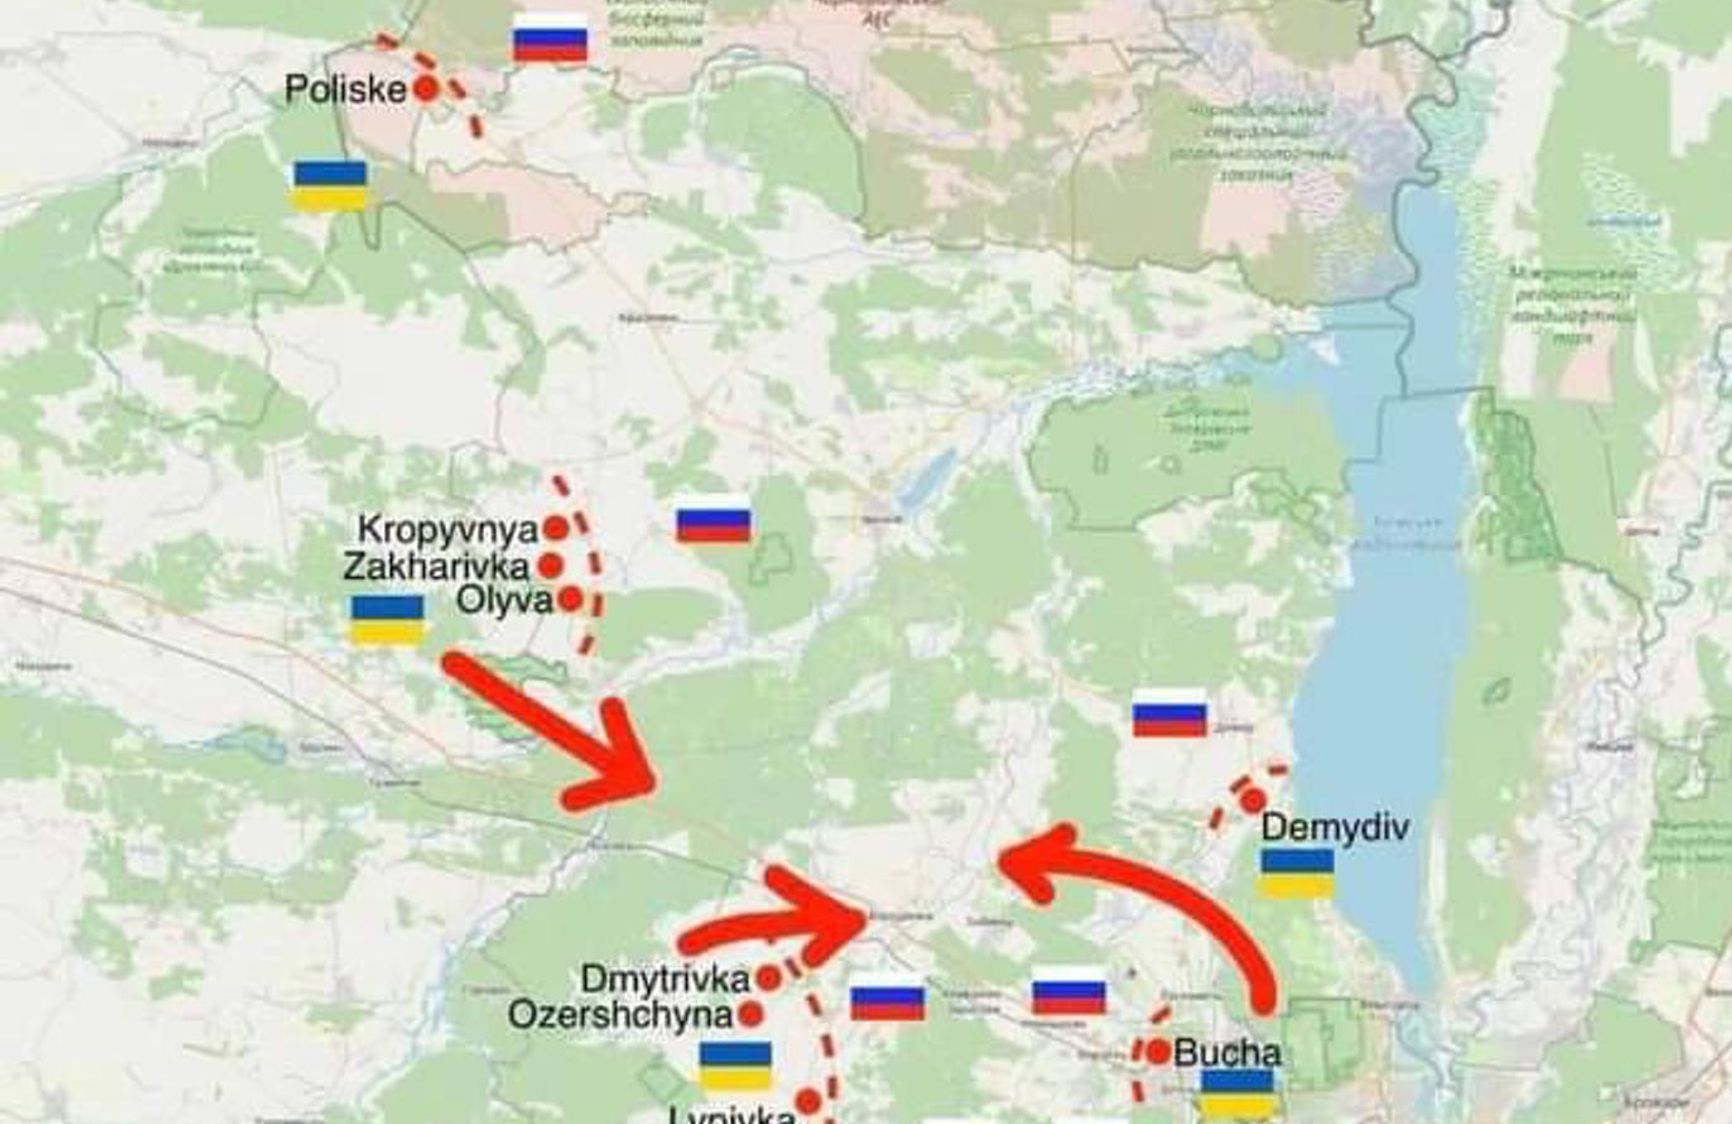 Approximate map of hostilities outside Kyiv